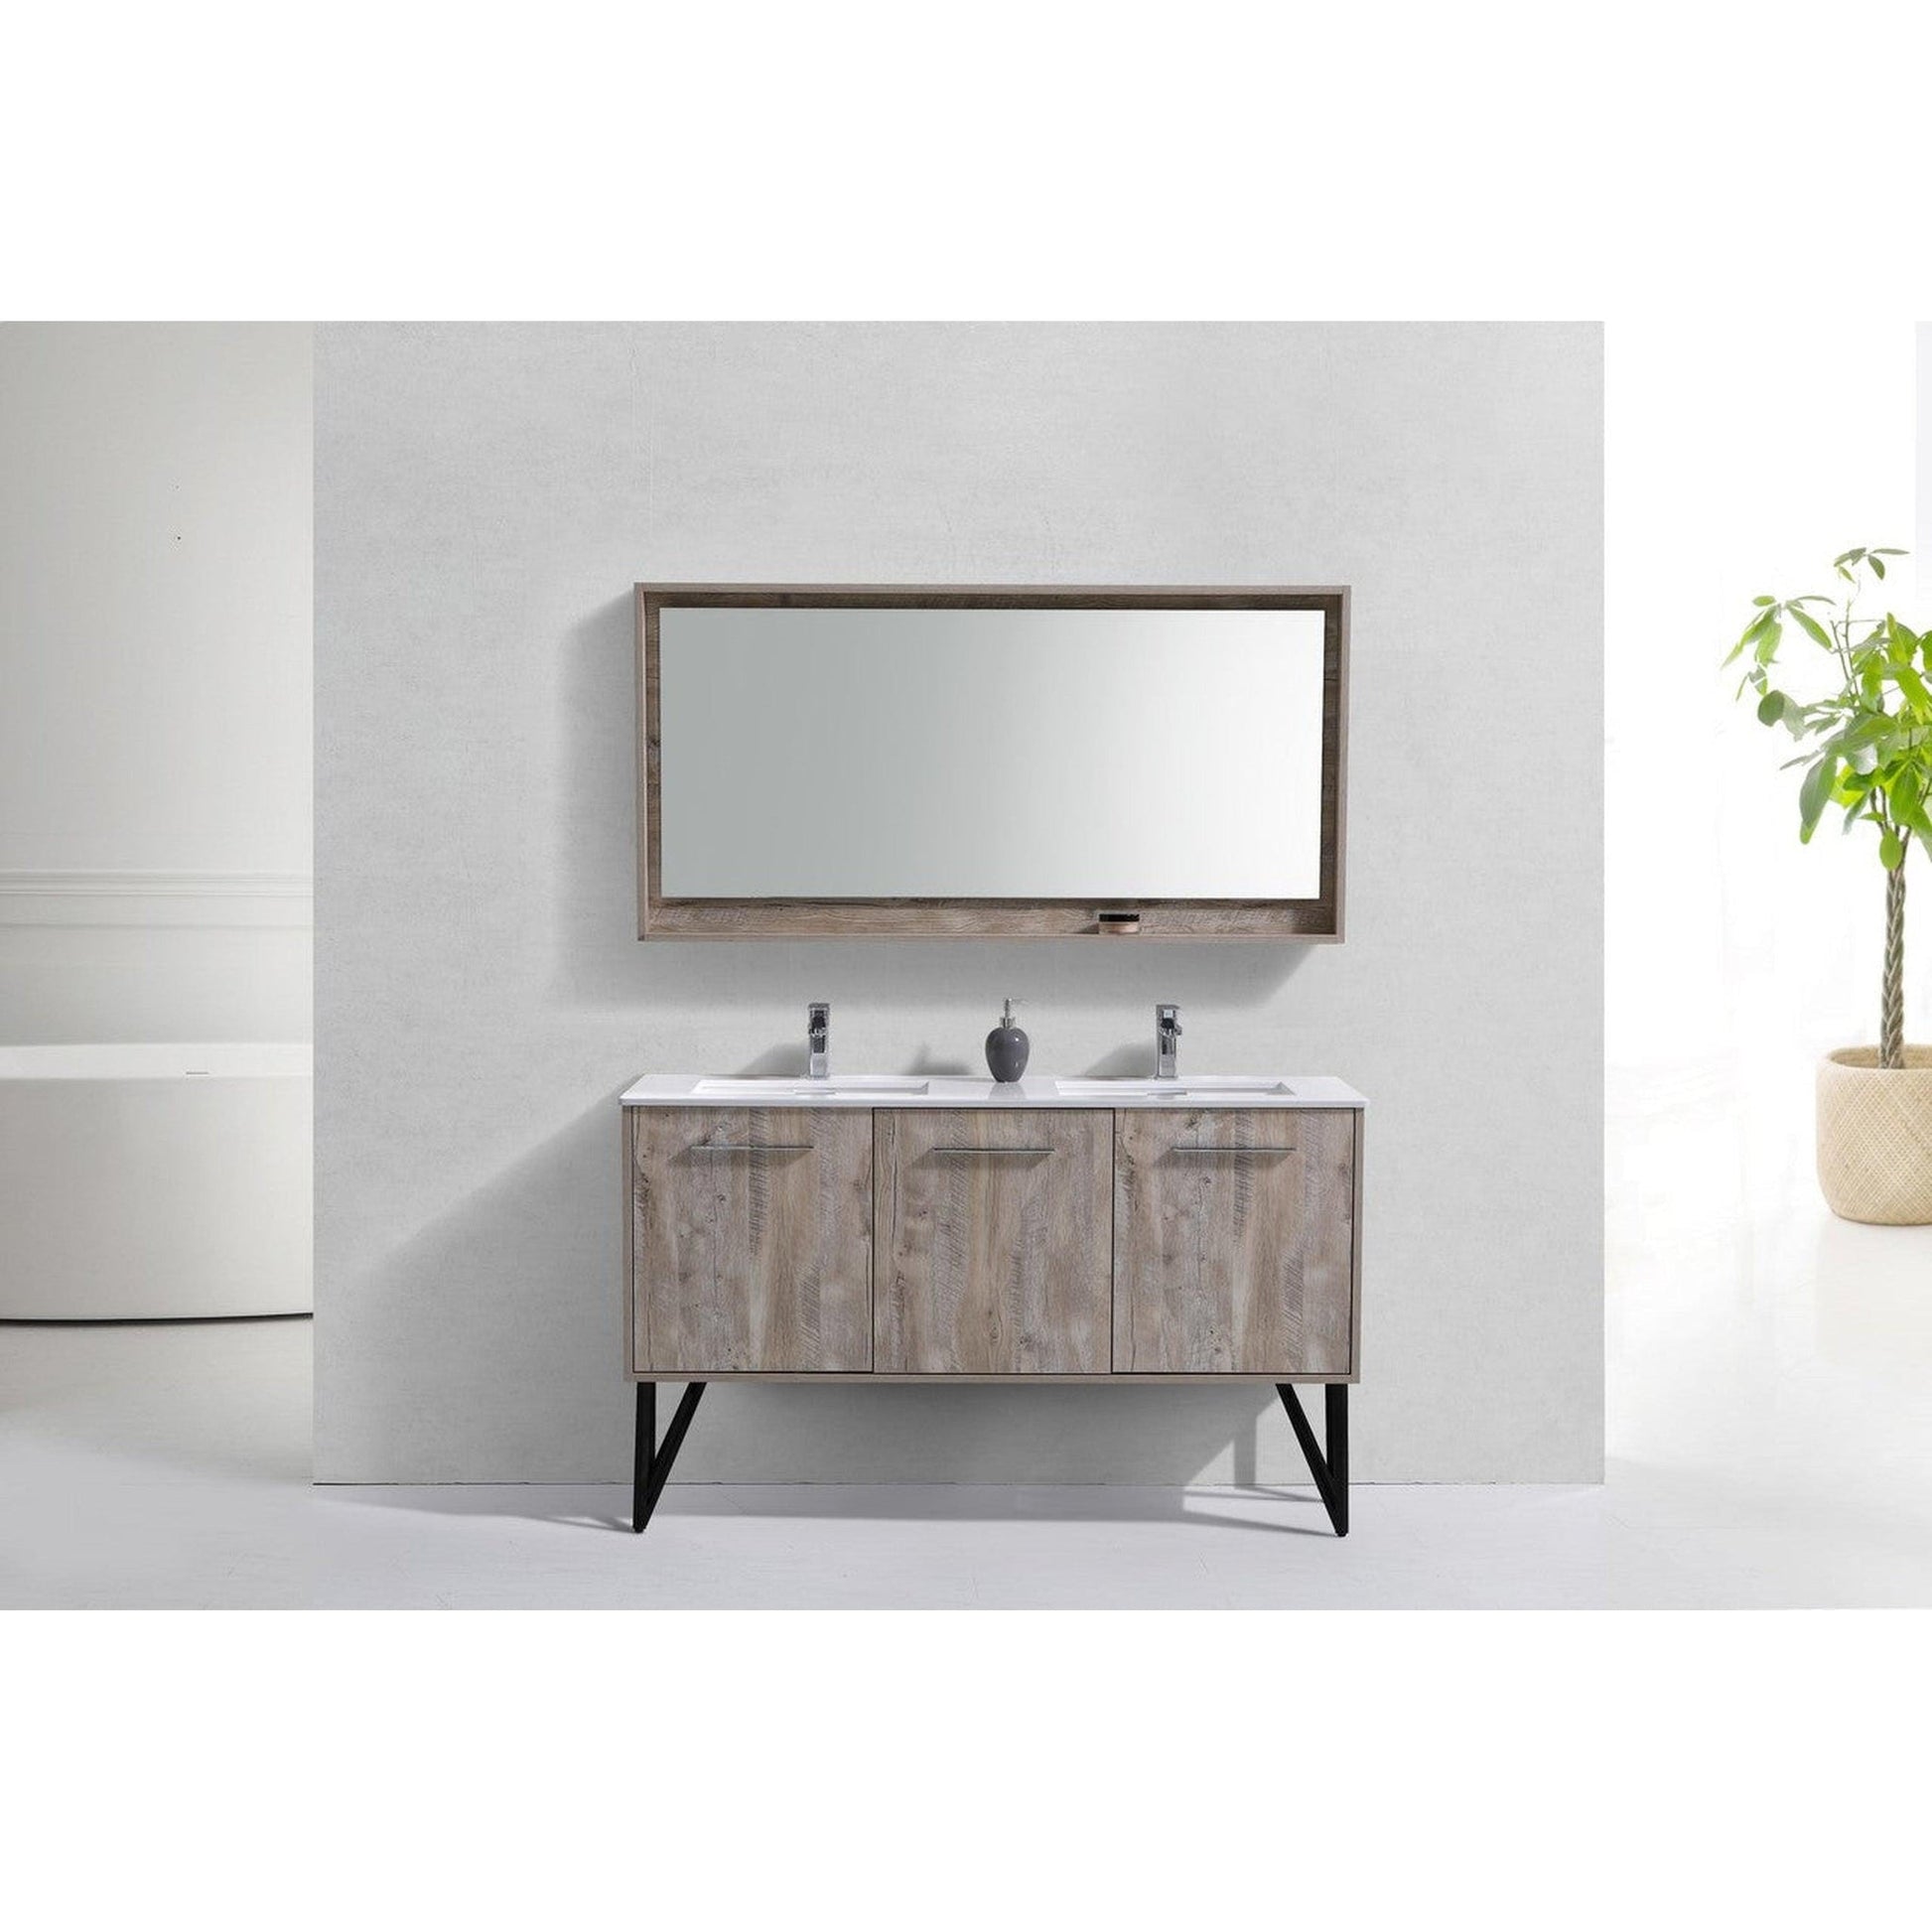 KubeBath Bosco 60" Nature Wood Modern Freestanding Bathroom Vanity With Double Undermount Sink With Overflow and 60" Nature Wood Framed Mirror